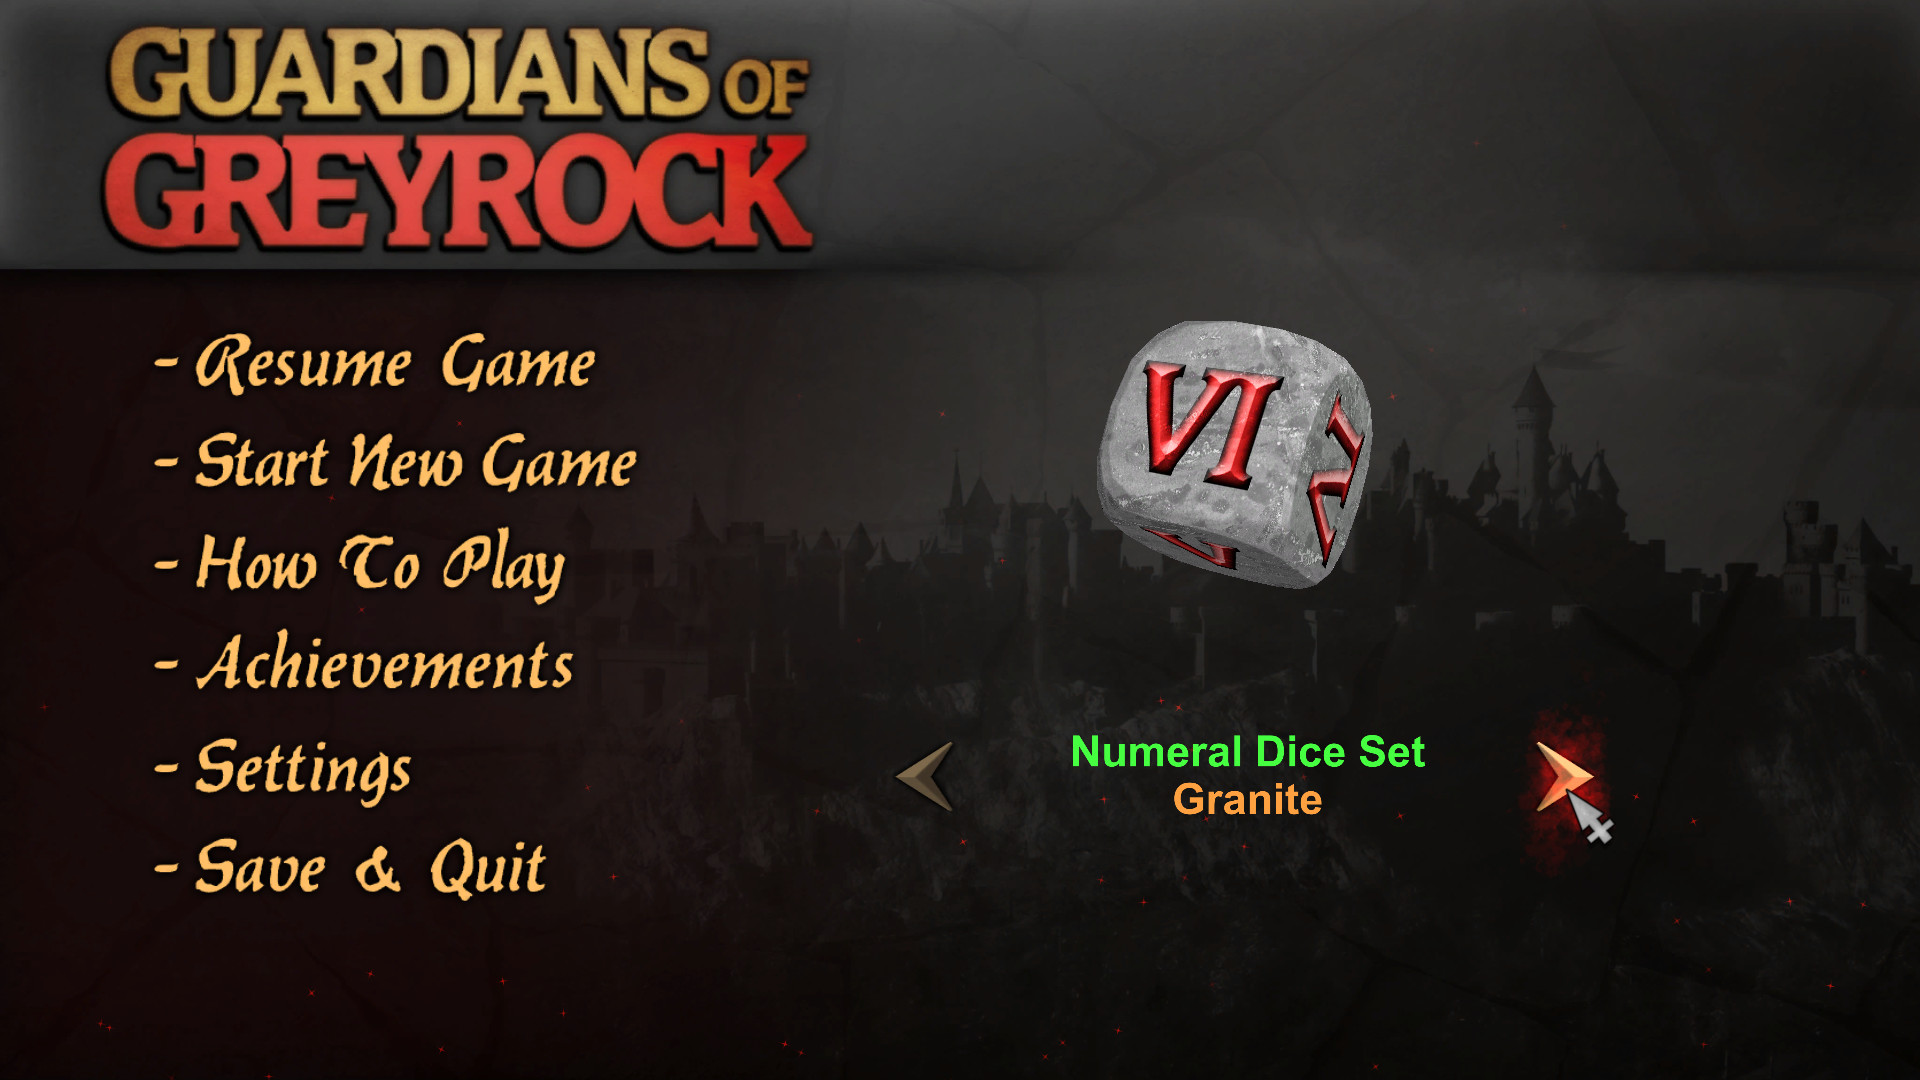 Guardians of Greyrock - Dice Pack: Numeral Set Featured Screenshot #1